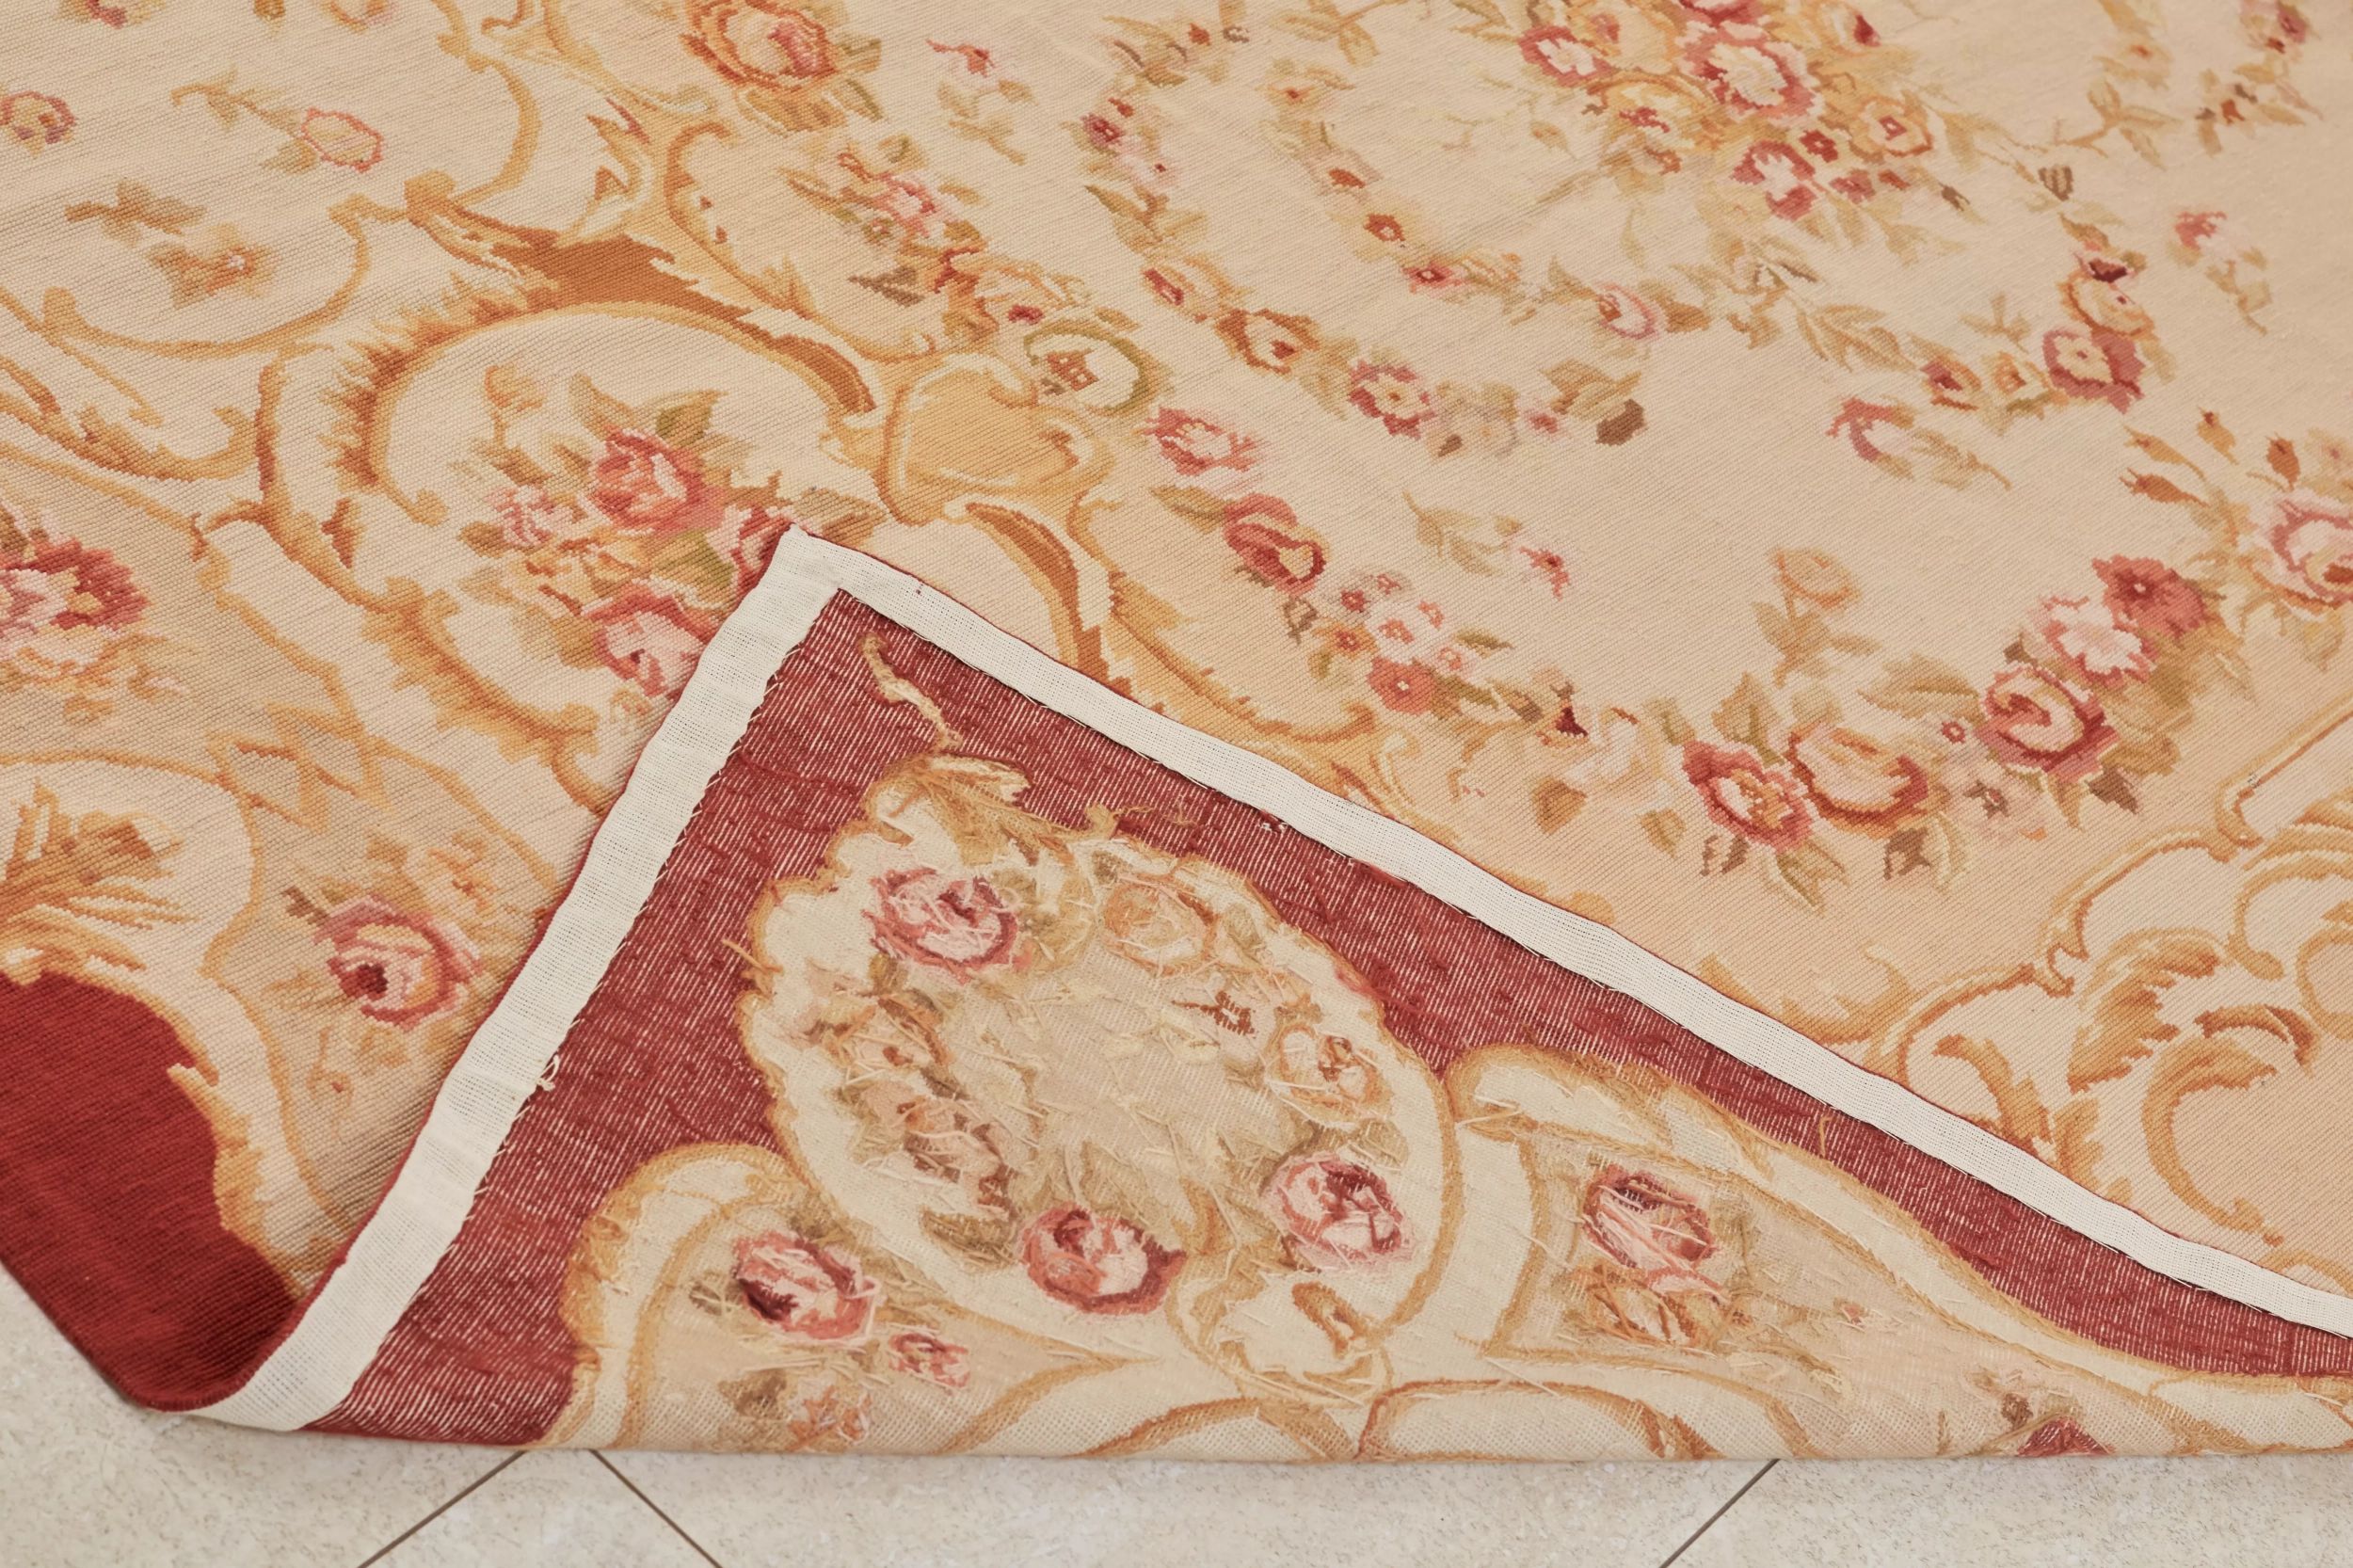 19th century French carpet in Aubusson style. - Image 6 of 8